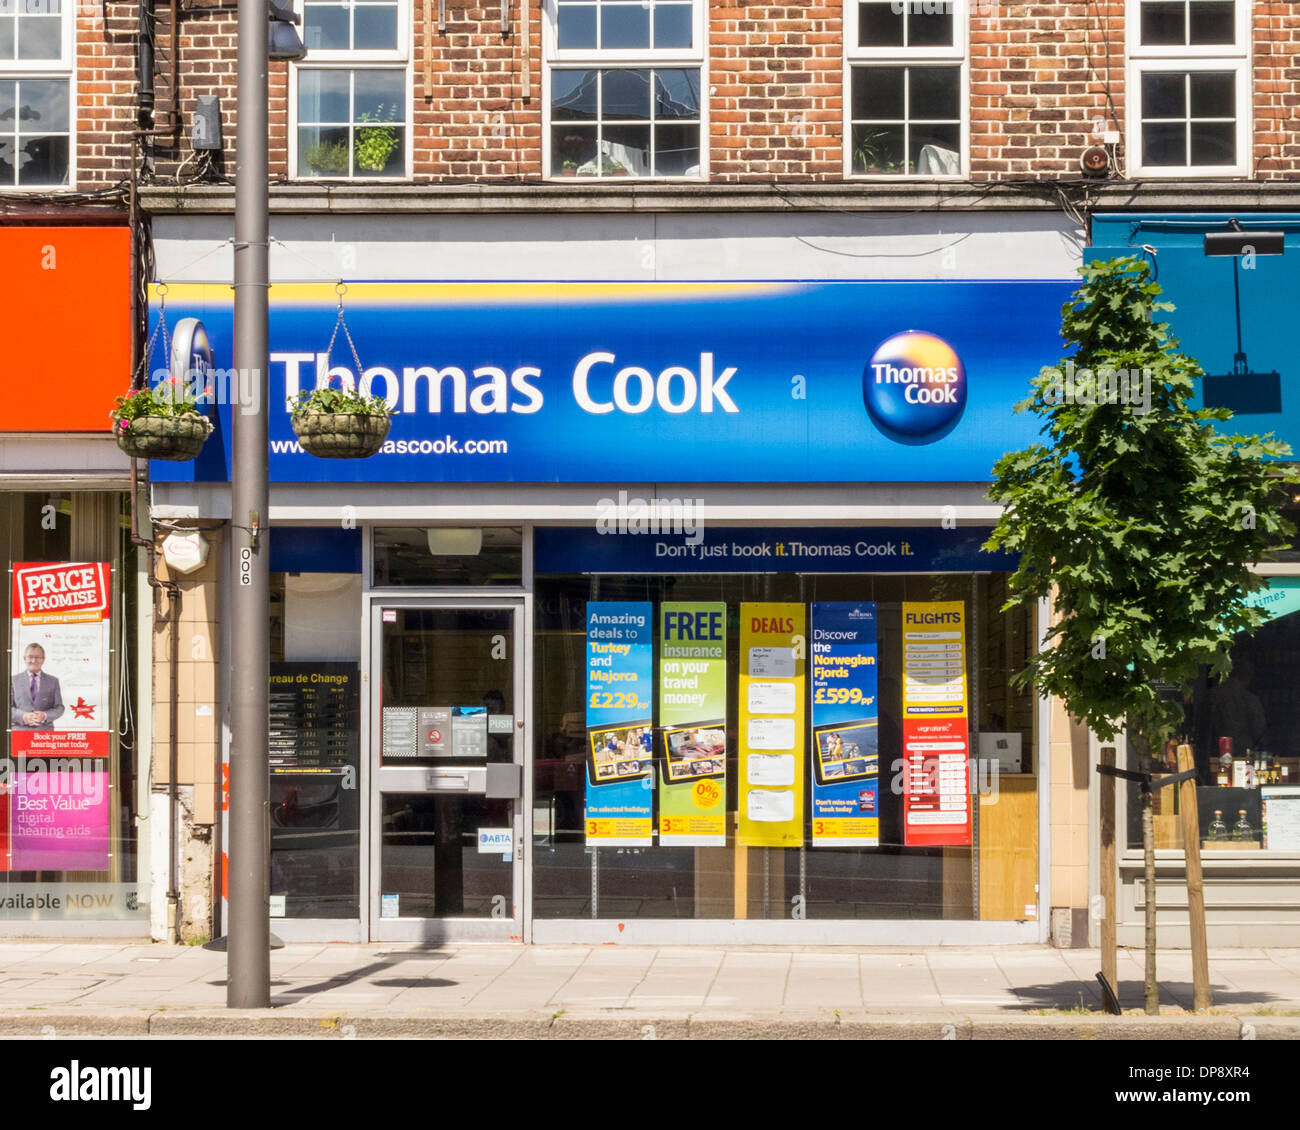 Thomas Cook travel Agent branch that closed down during the credit crunch Twickenham. Greater London. UK Stock Photo